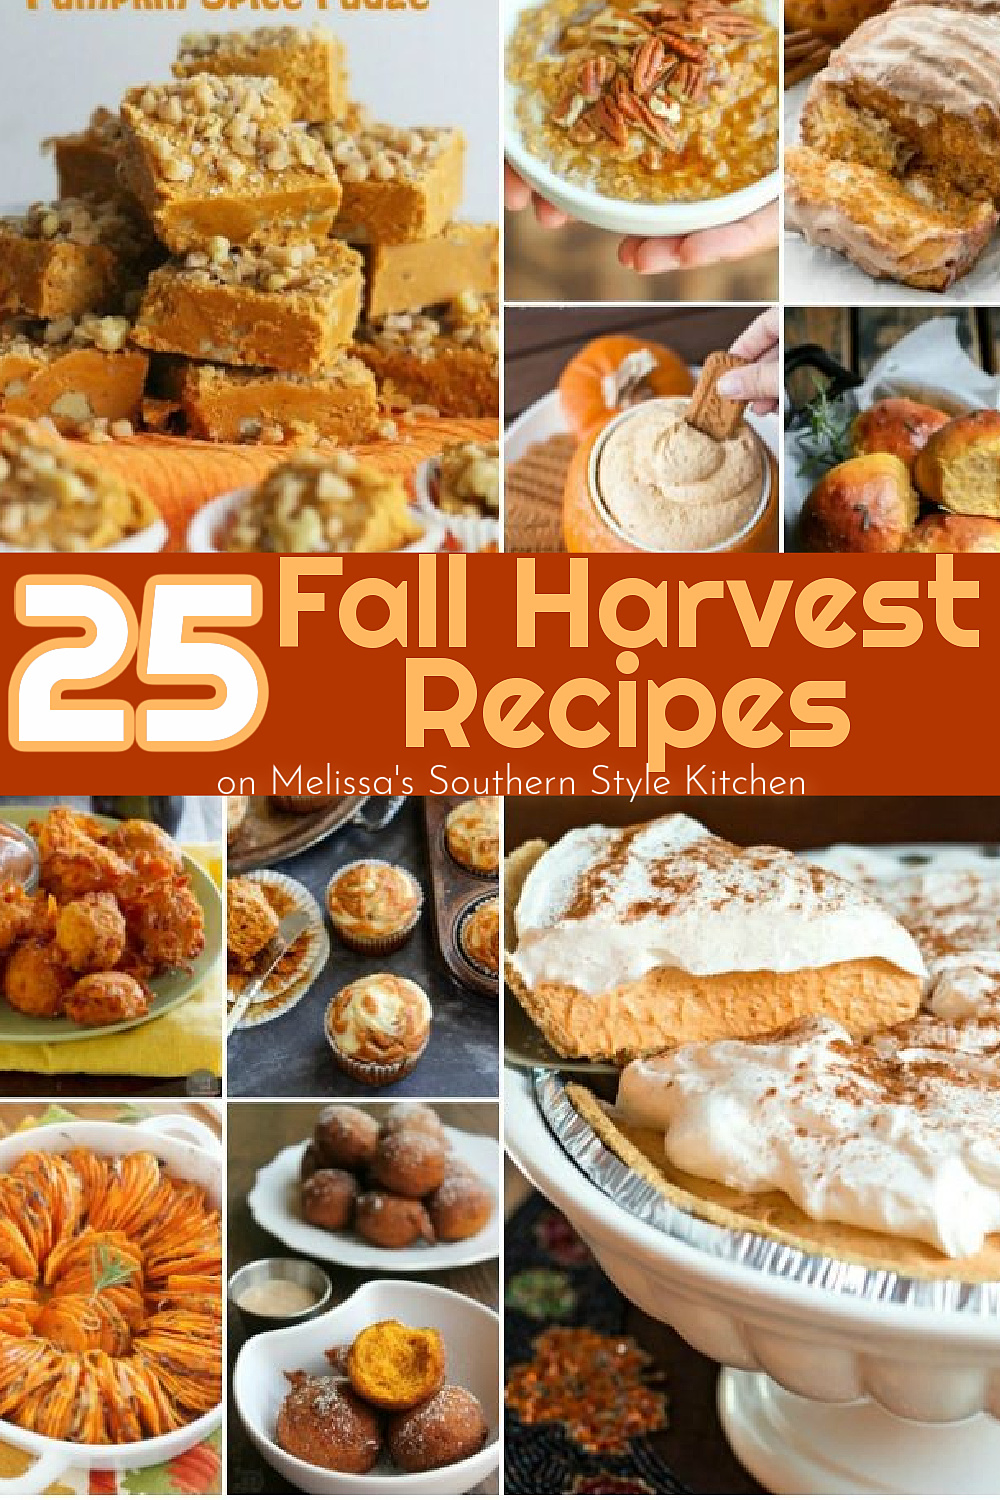 There's something for every occasion in this collection of 25 Fabulous Fall Harvest Recipes #pumpkinrecipes #pumpkinpie #cookies #pumpkincake #fudge #sweetpotatoes #sweetpotatopie #doughnuts